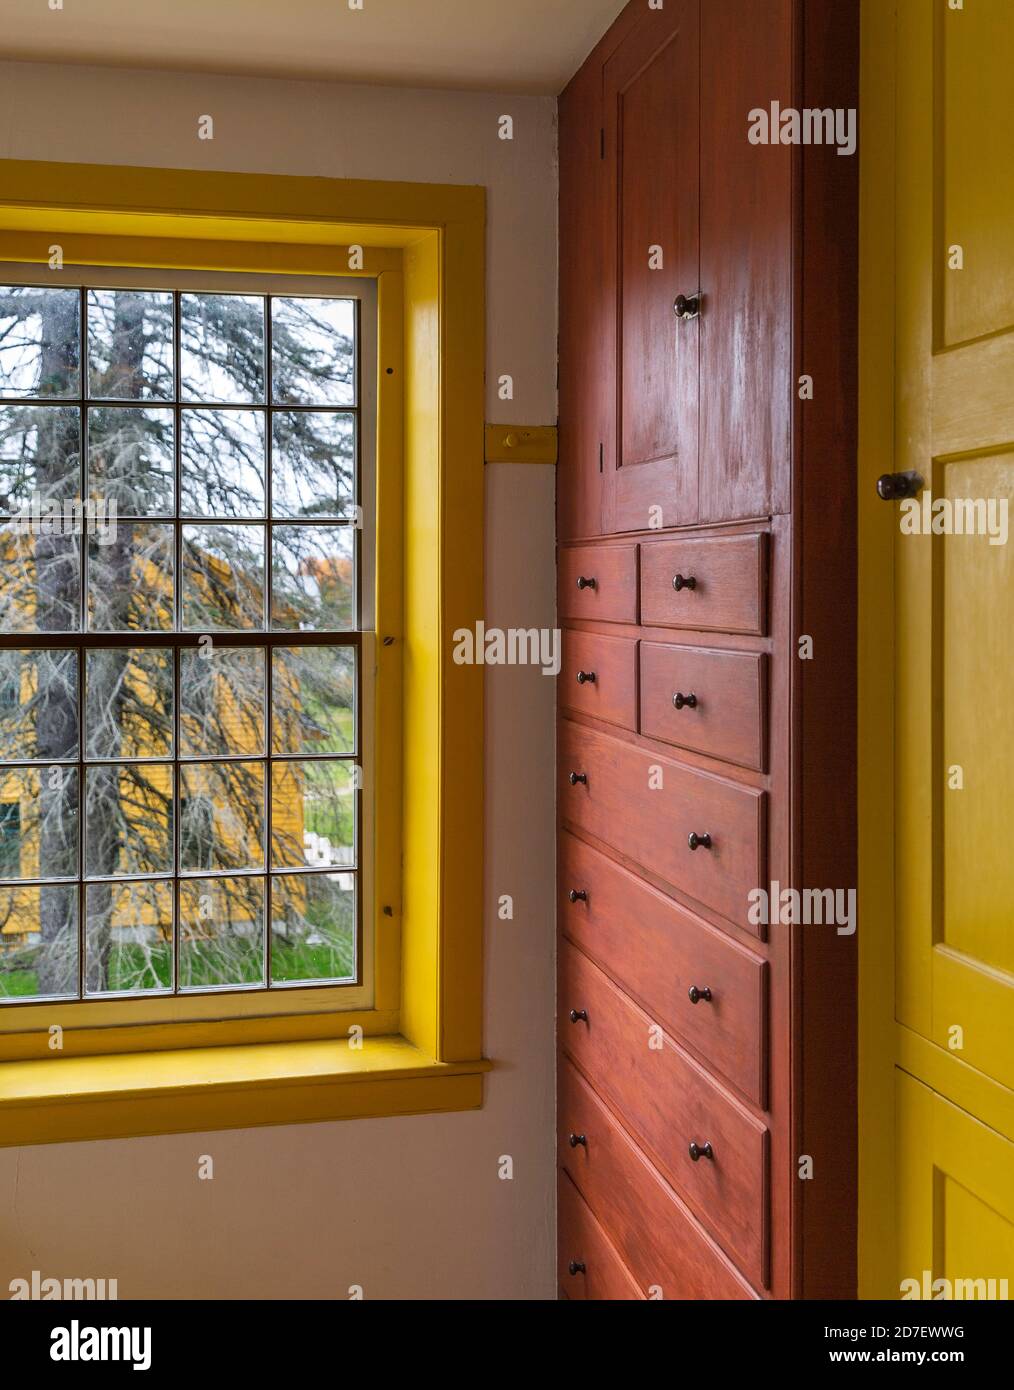 interior view of yellow window frame and mahogany cabinets in perfect harmony in a Shaker Style house Stock Photo